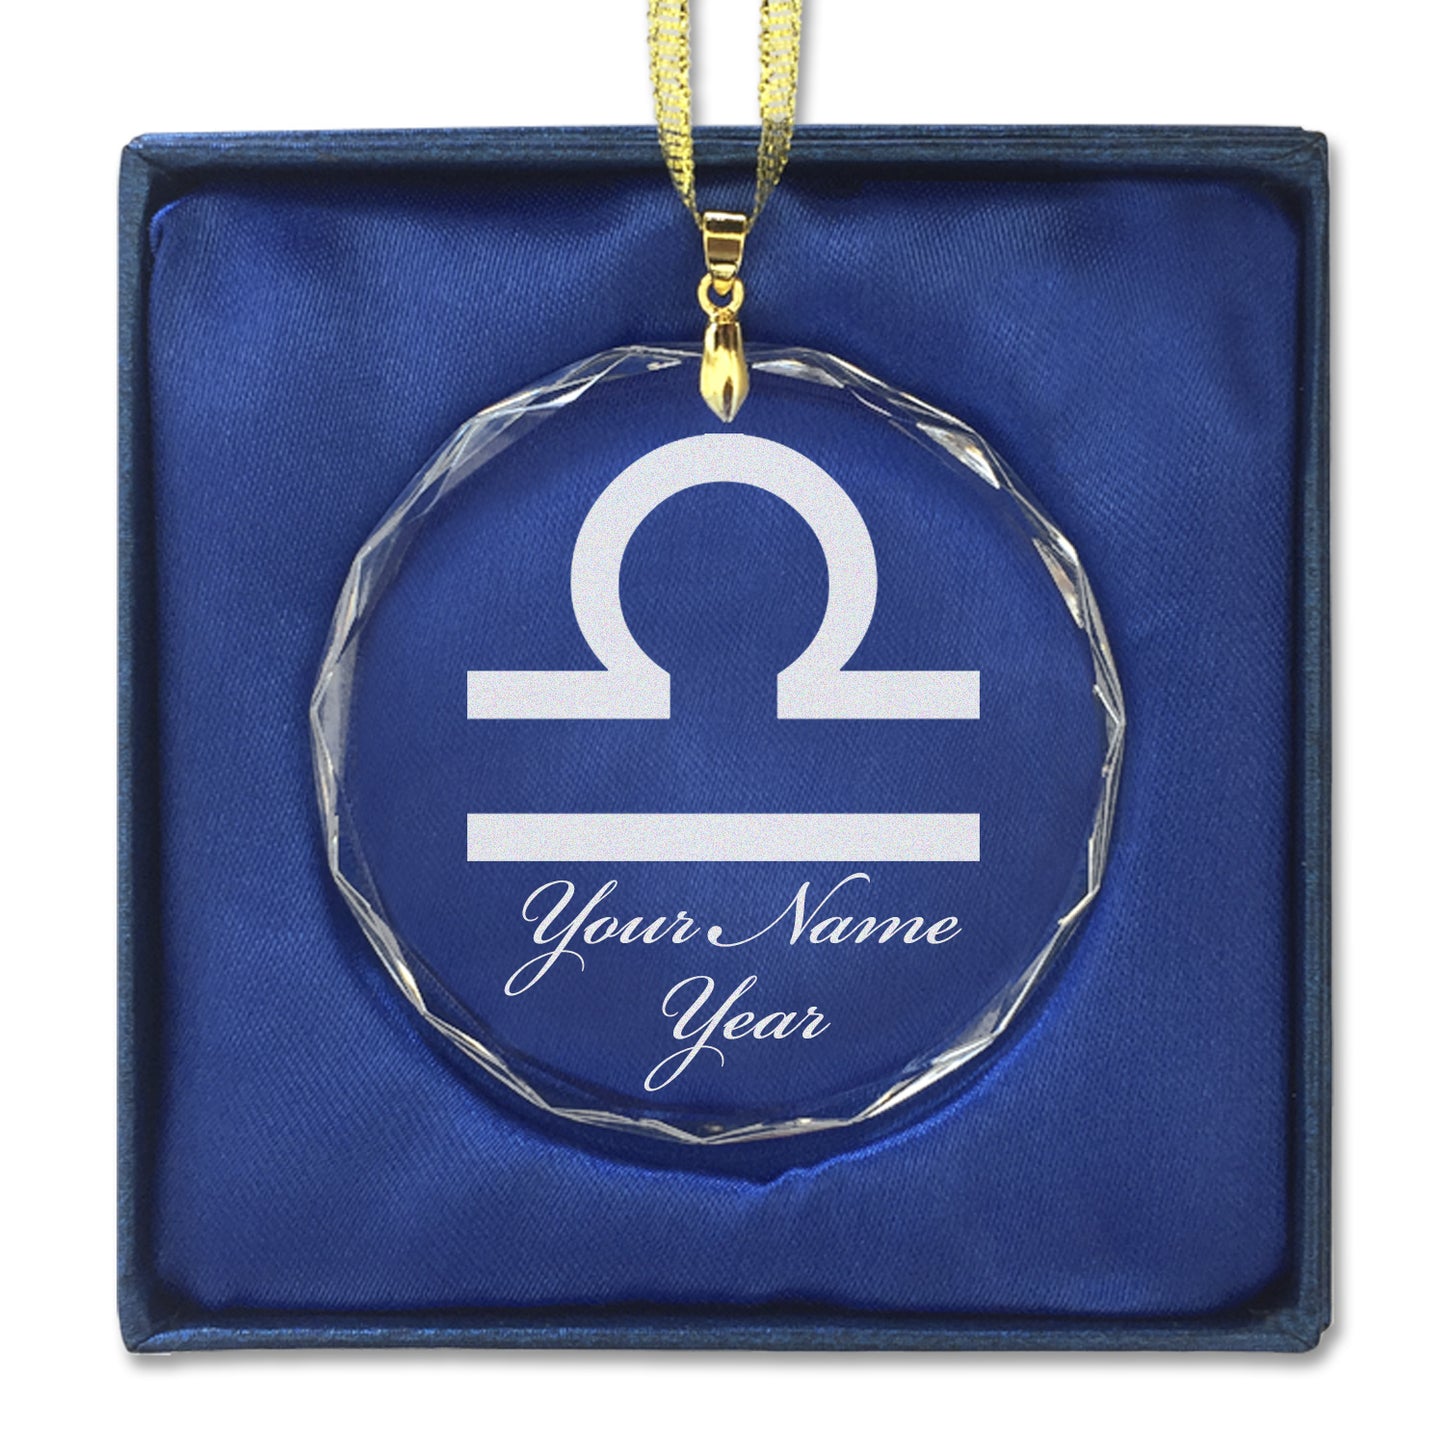 LaserGram Christmas Ornament, Zodiac Sign Libra, Personalized Engraving Included (Round Shape)